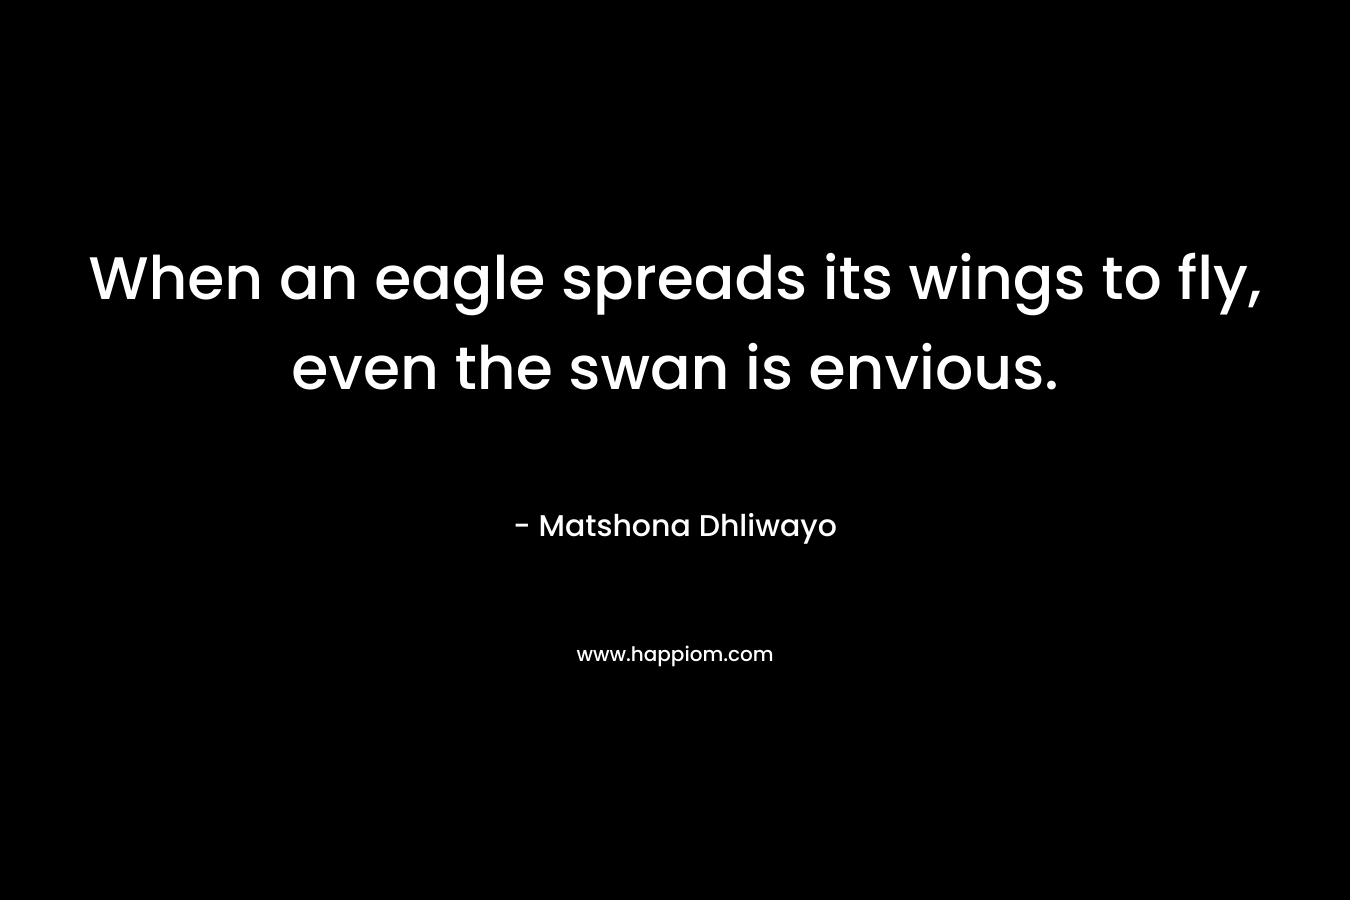 When an eagle spreads its wings to fly, even the swan is envious. – Matshona Dhliwayo